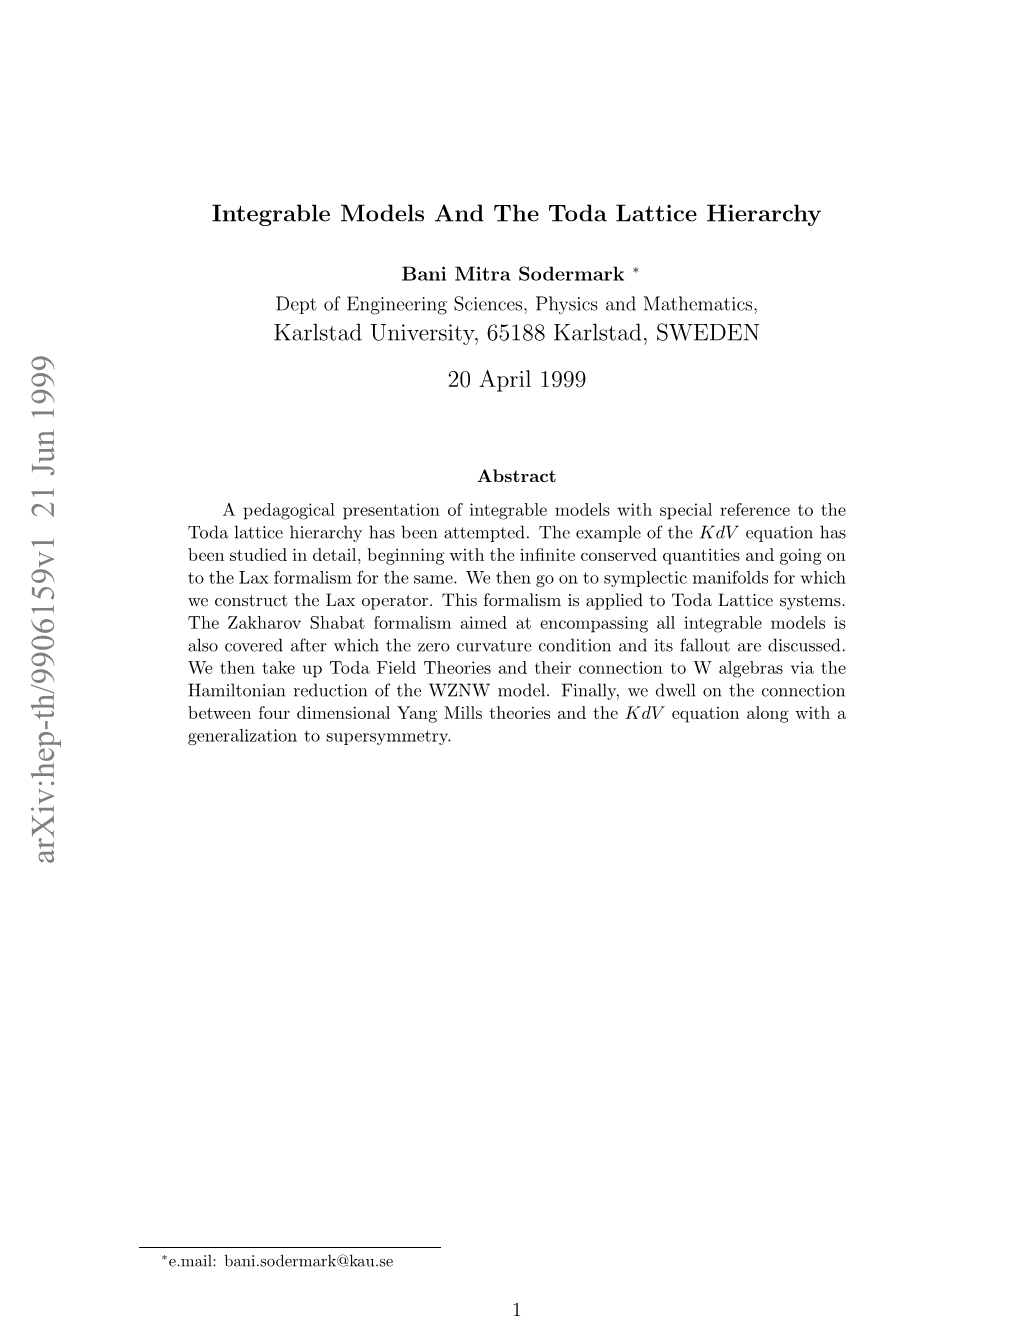 Integrable Models and the Toda Lattice Hierarchy